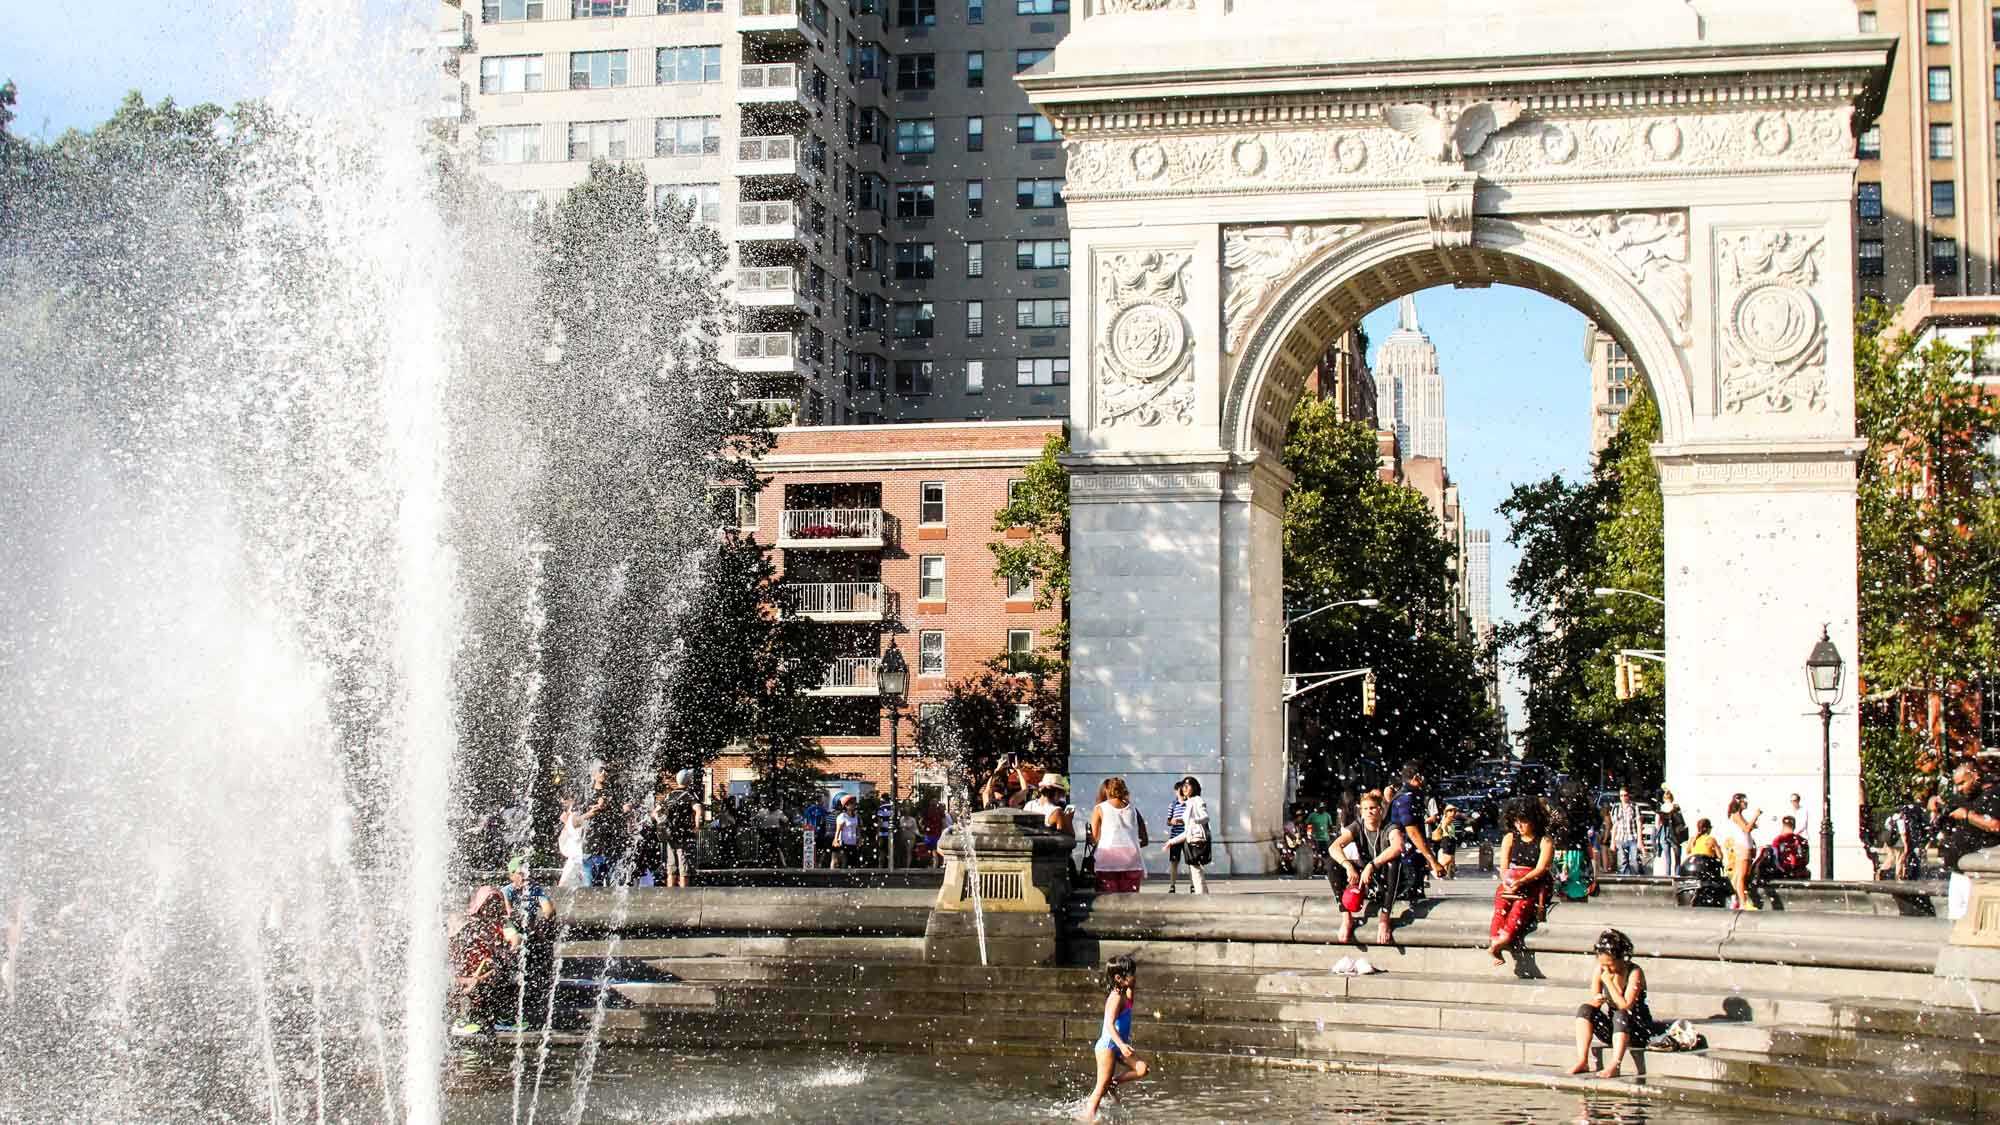 fountain and arch at Washington Square Park in Greenwich Village neighborhood, New York